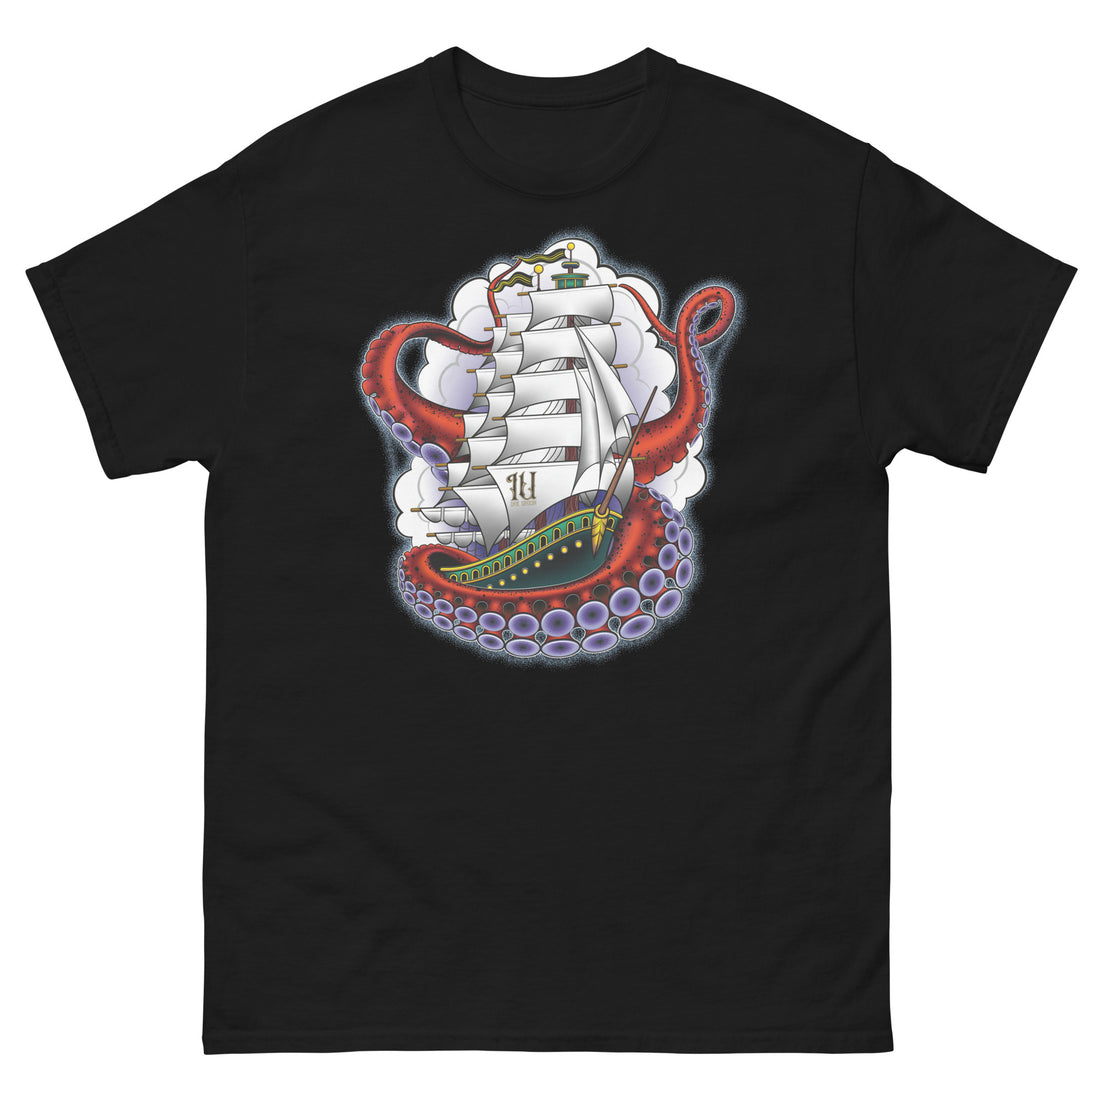 A black t-shirt with an old-school clipper ship tattoo design in green and brown with white sails surrounded by octopus tentacles in shades of red with purple tentacles. Behind the ship are purple-tinged clouds.